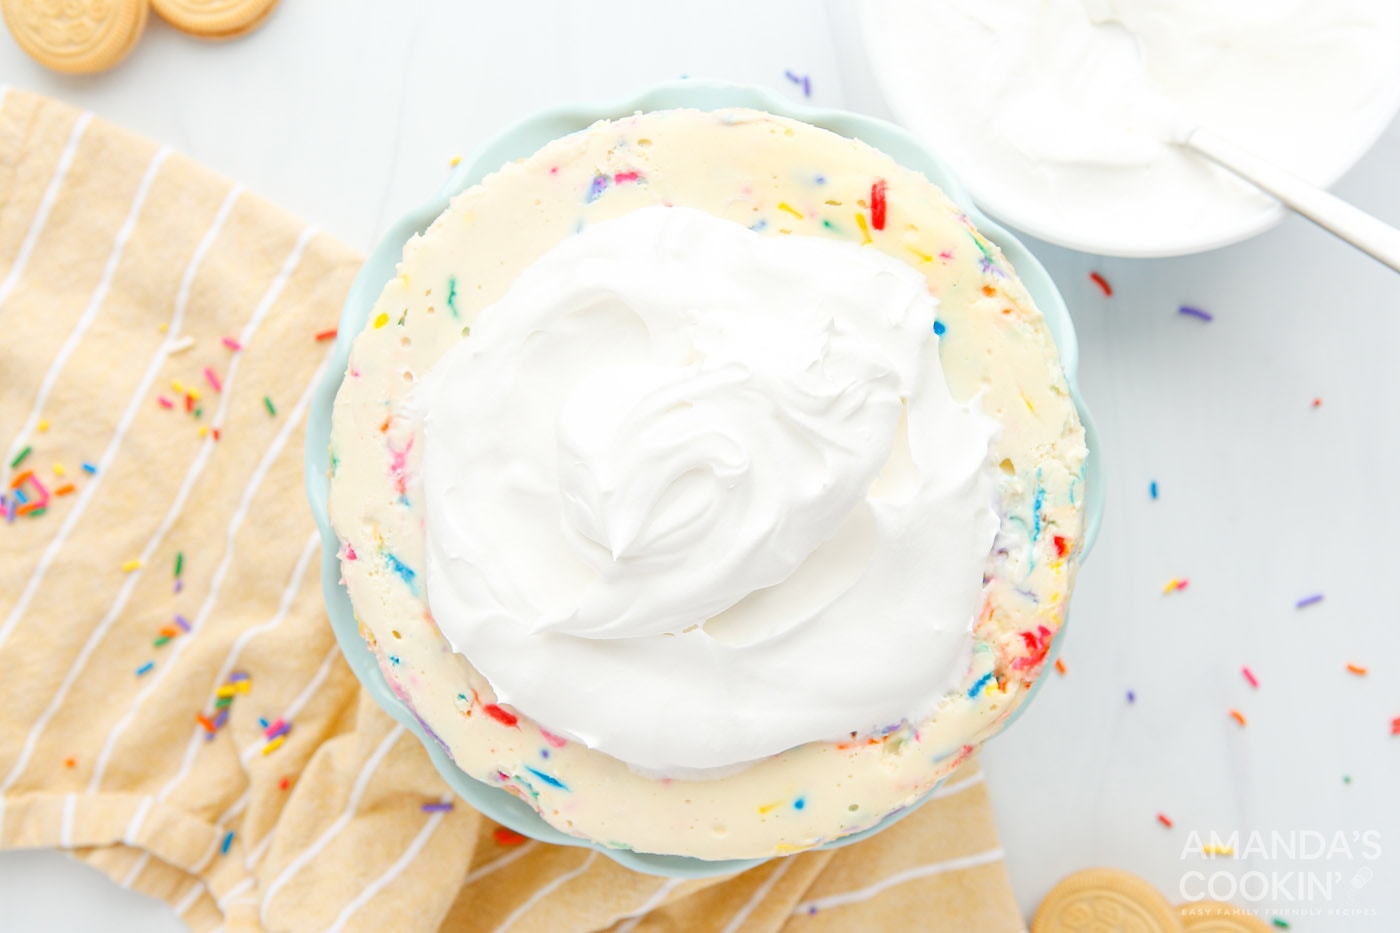 whipped cream dollop on top of funfetti cheesecake